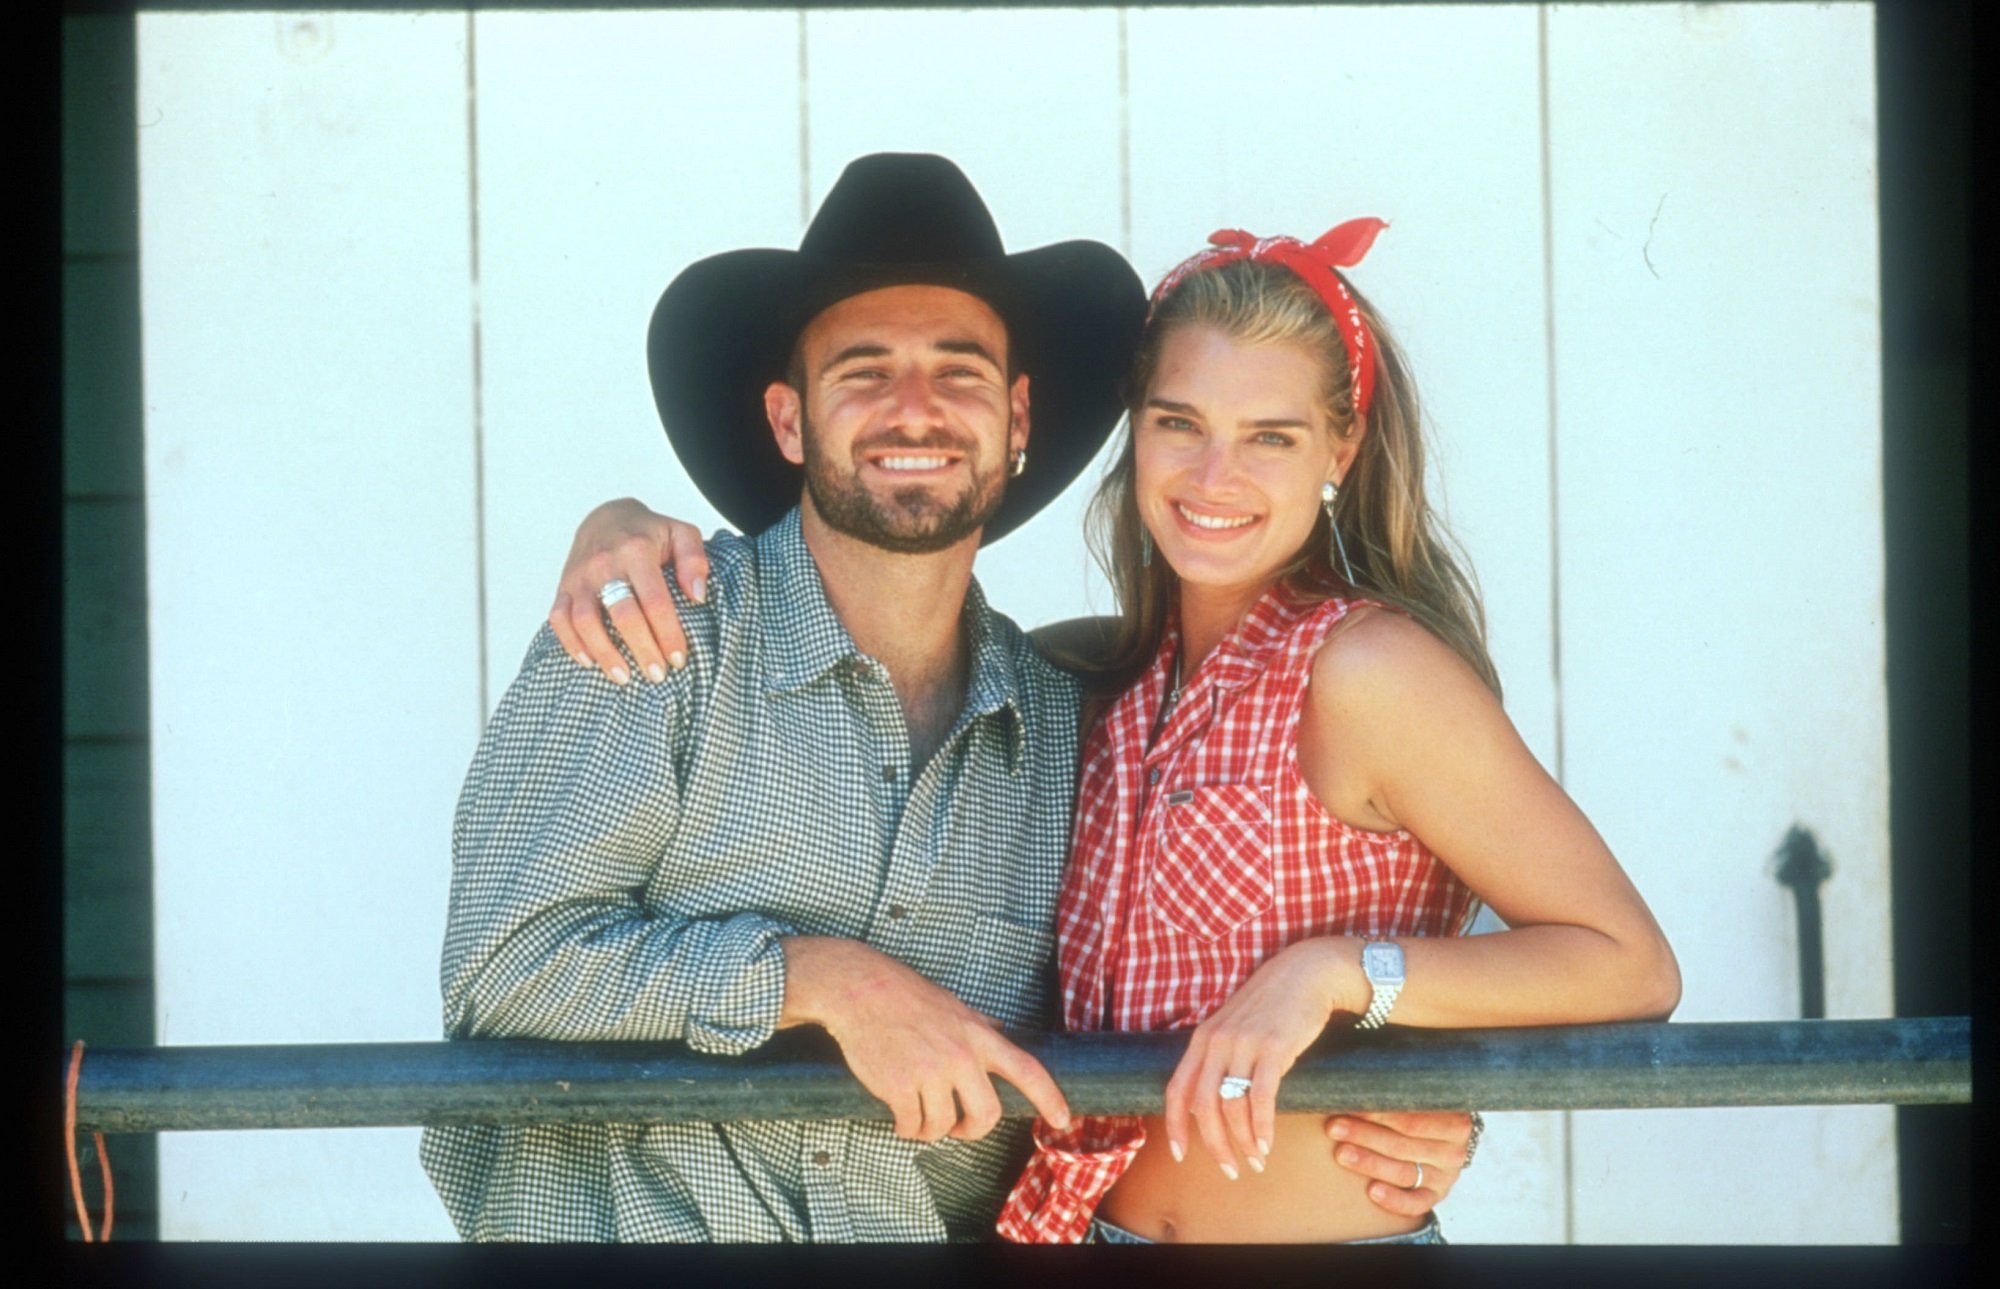 Andre Agassi in a black cowboy hat smiles with Brooke Shields in a red-checkered shirt